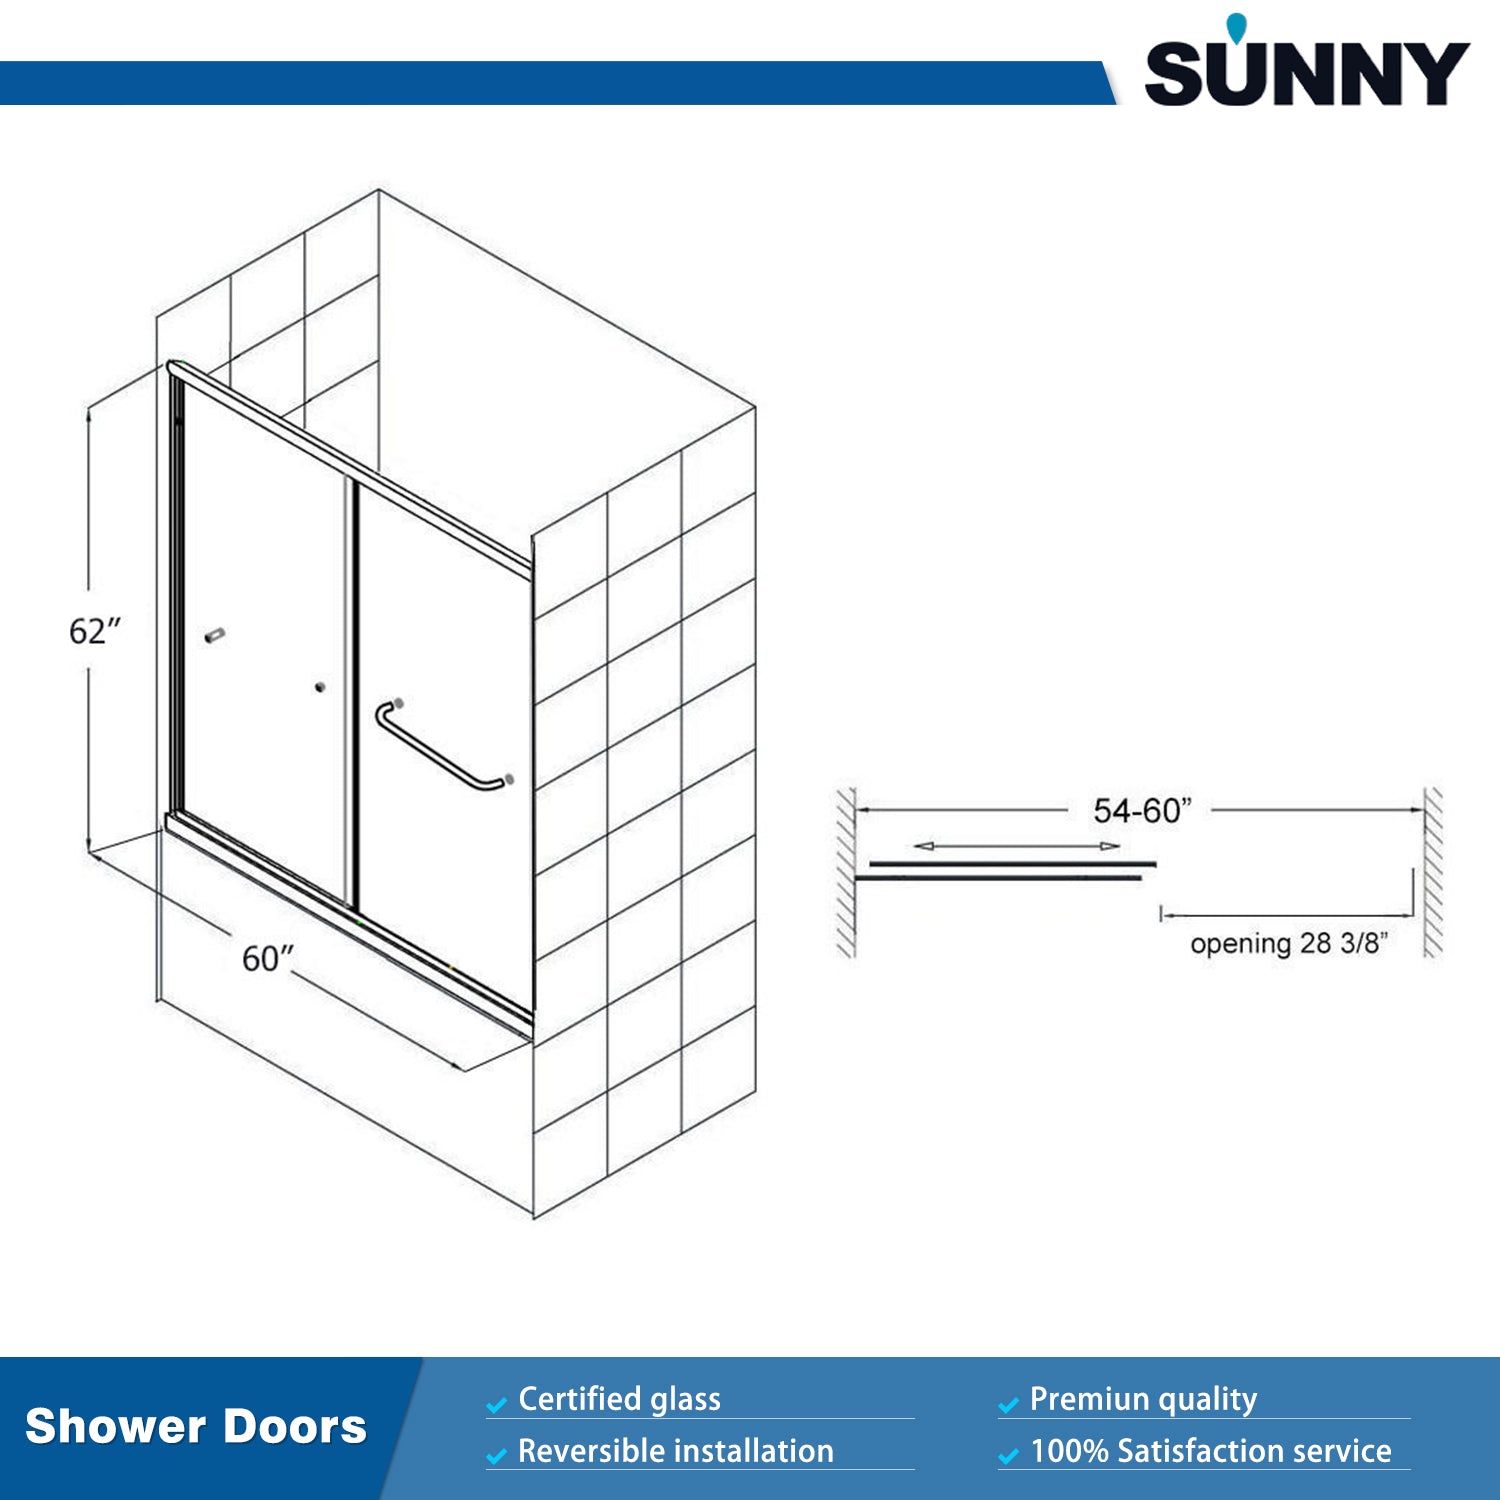 SUNNY SHOWER 60 in. W x 62 in. H Bathtub Double Sliding Doors Dimensions